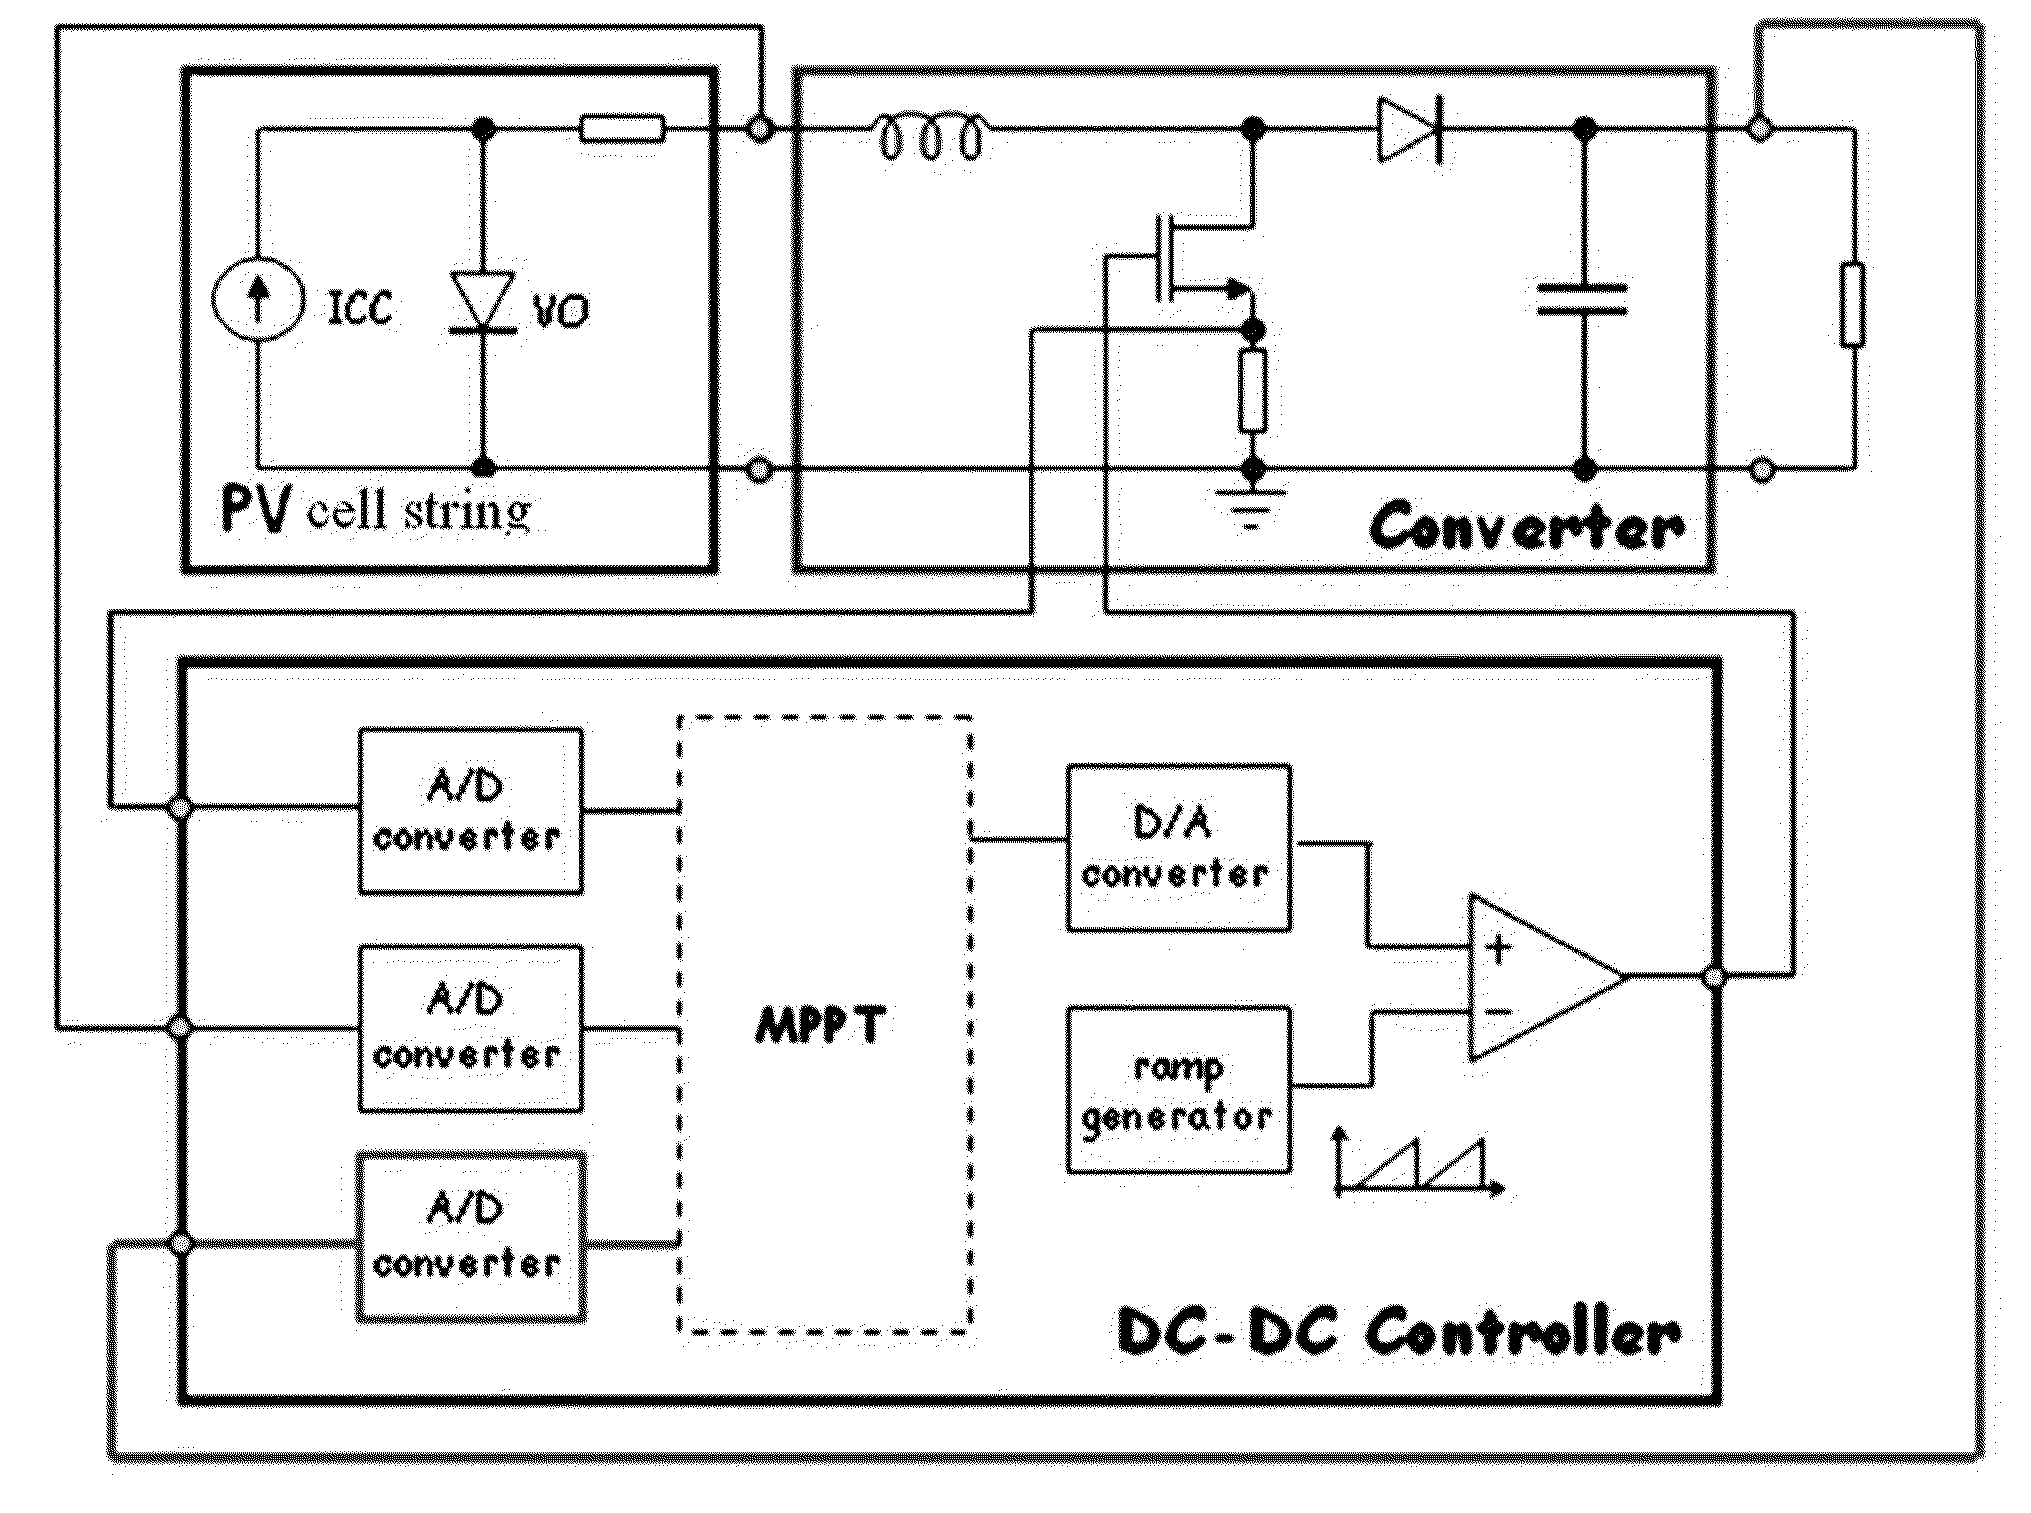 Multi-cellular photovoltaic panel system with DC-DC conversion replicated for groups of cells in series of each panel and photovoltaic panel structure